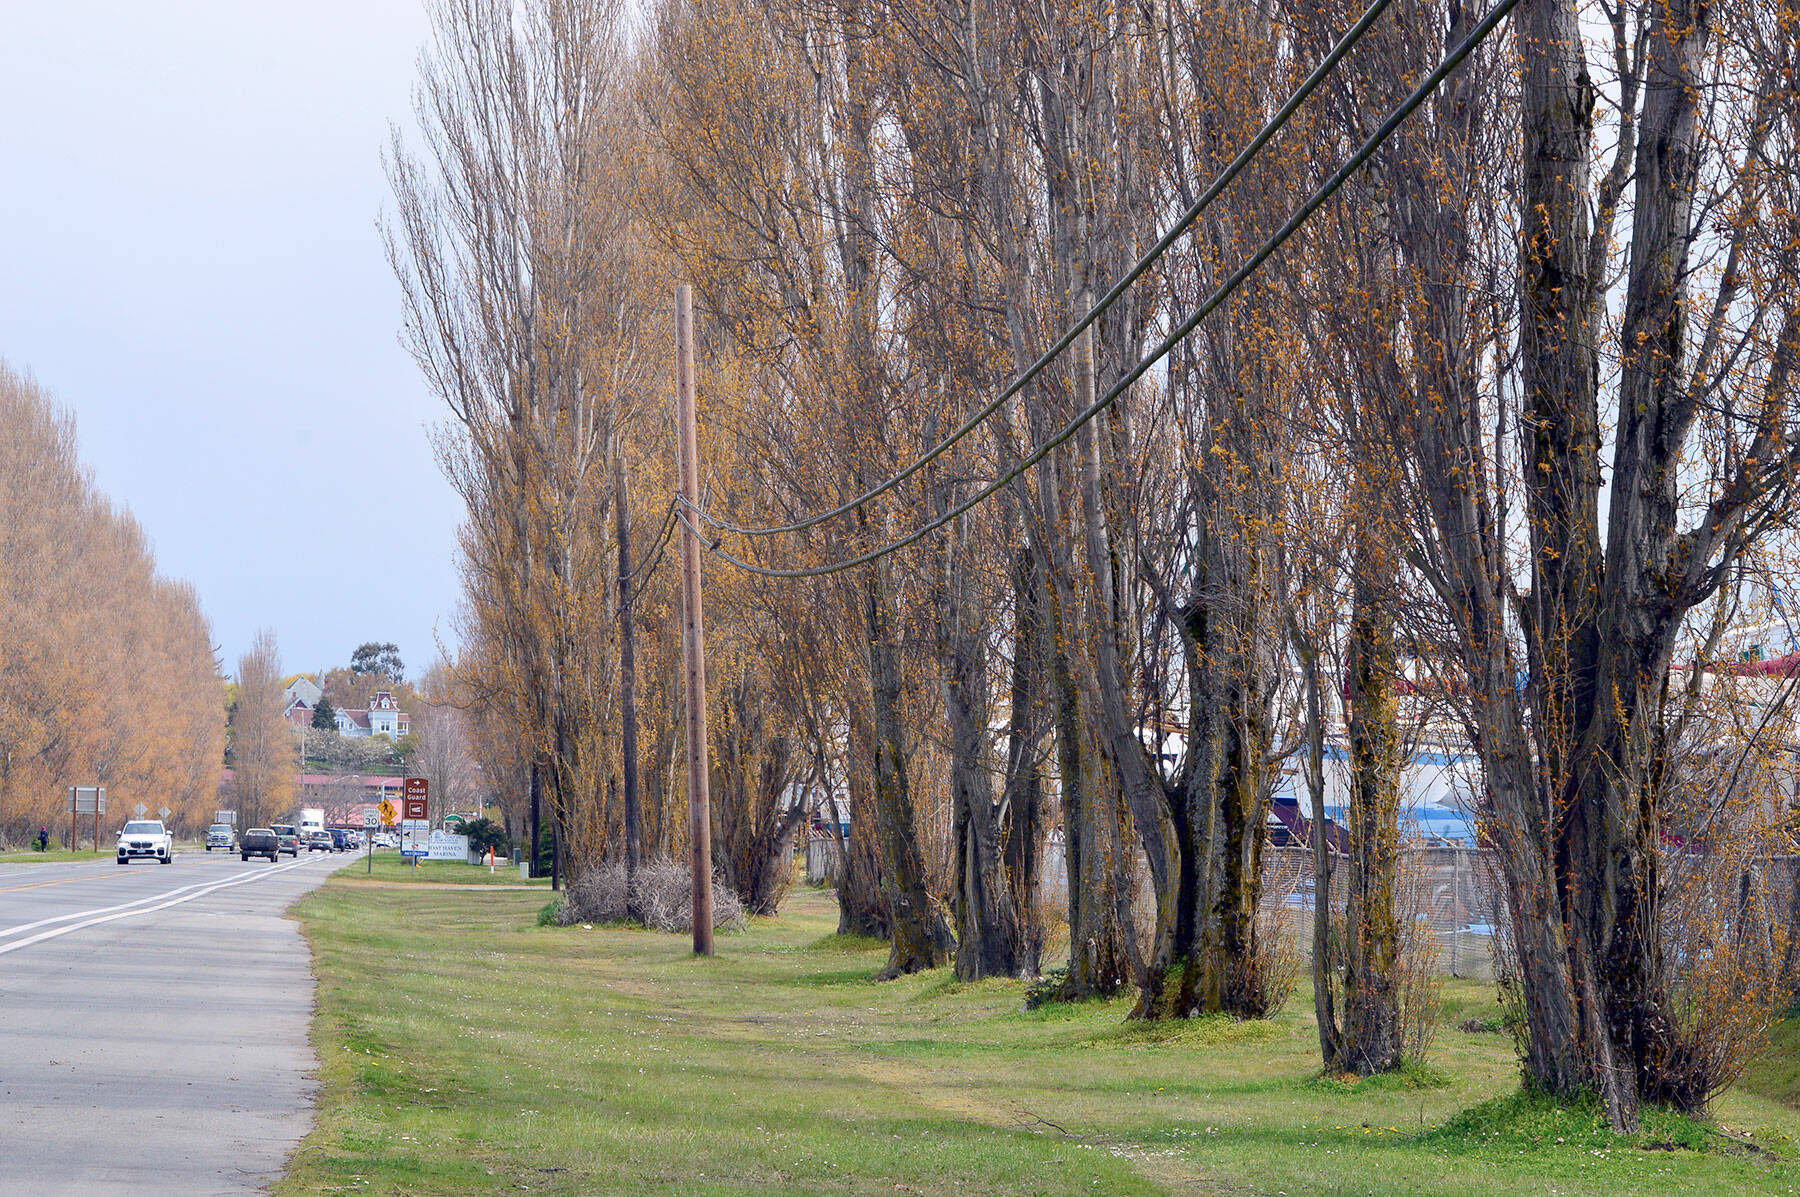 The Lombardy poplars bordering the Port Townsend Boat Haven on Sims Way — along with the utility lines — continue to be the subject of debate. (Diane Urbani de la Paz/Peninsula Daily News)